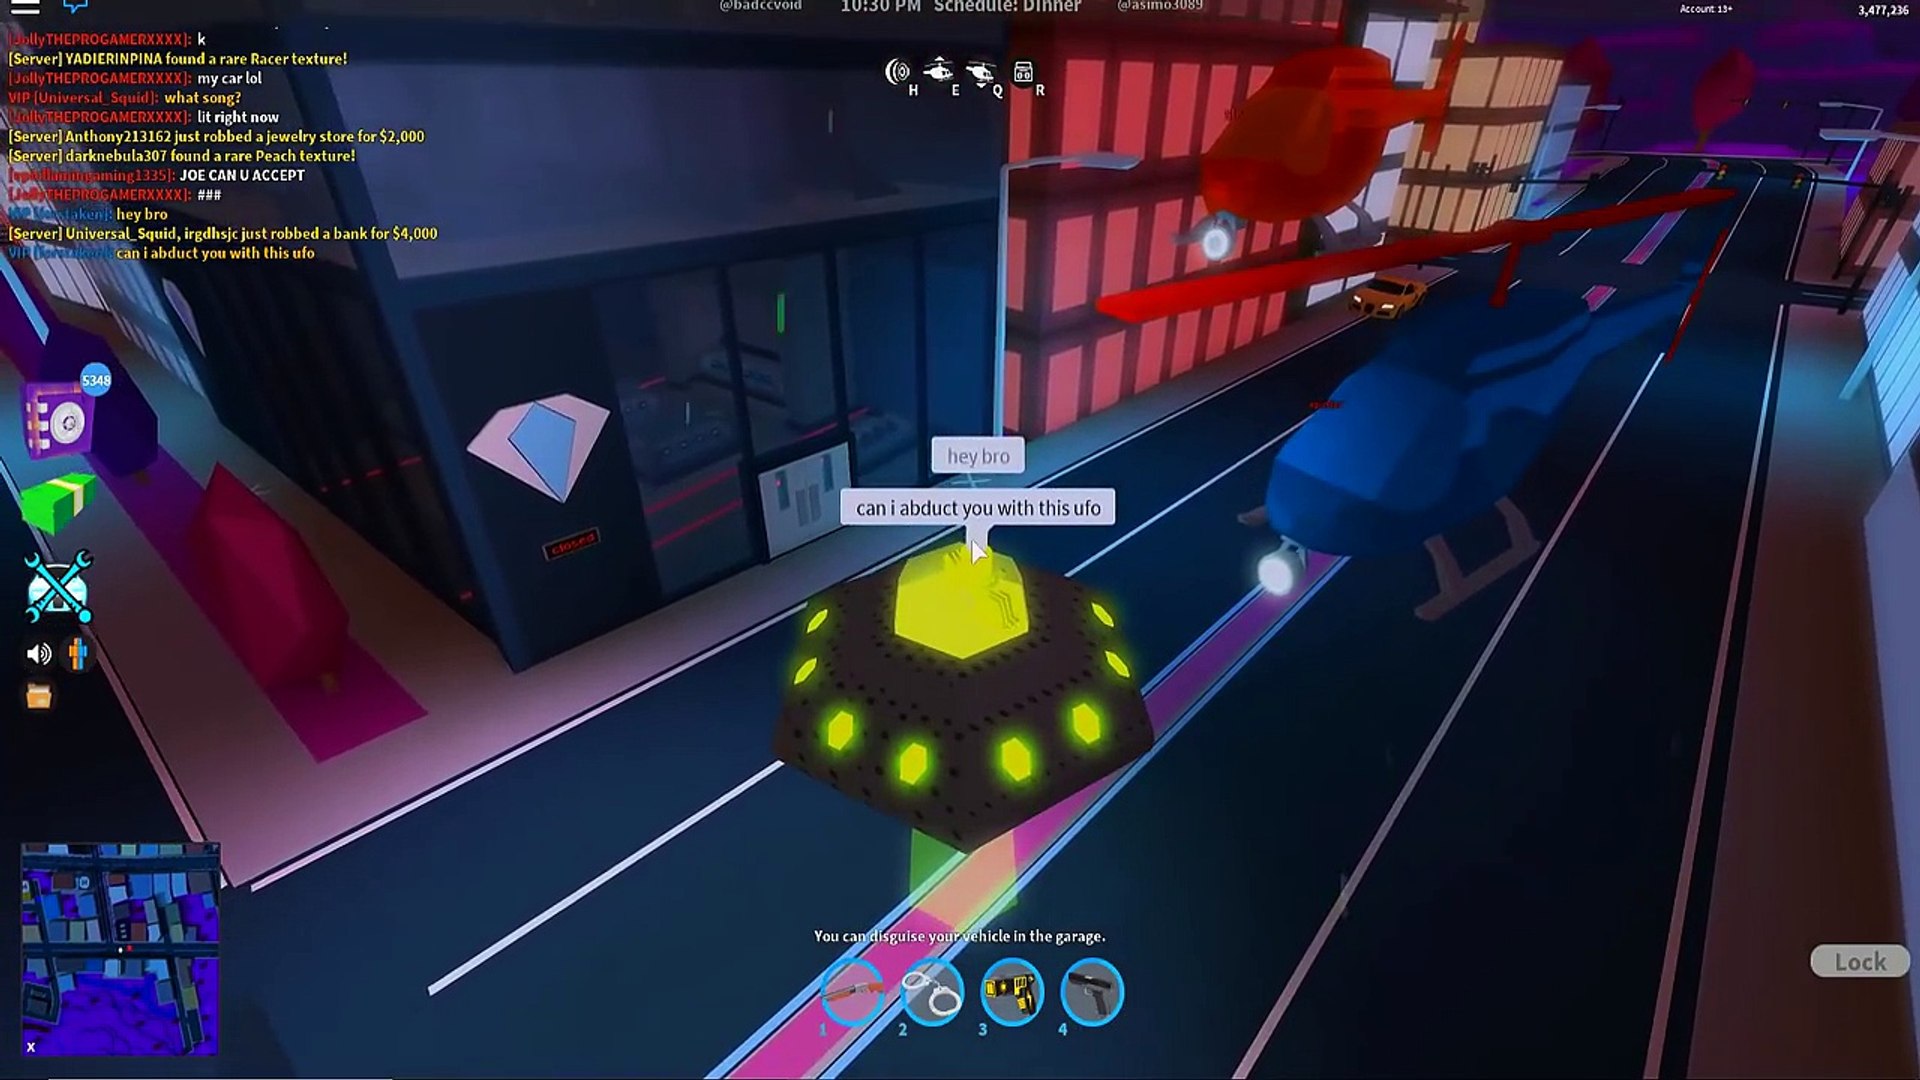 Abducting People With The New Ufo Roblox Jailbreak